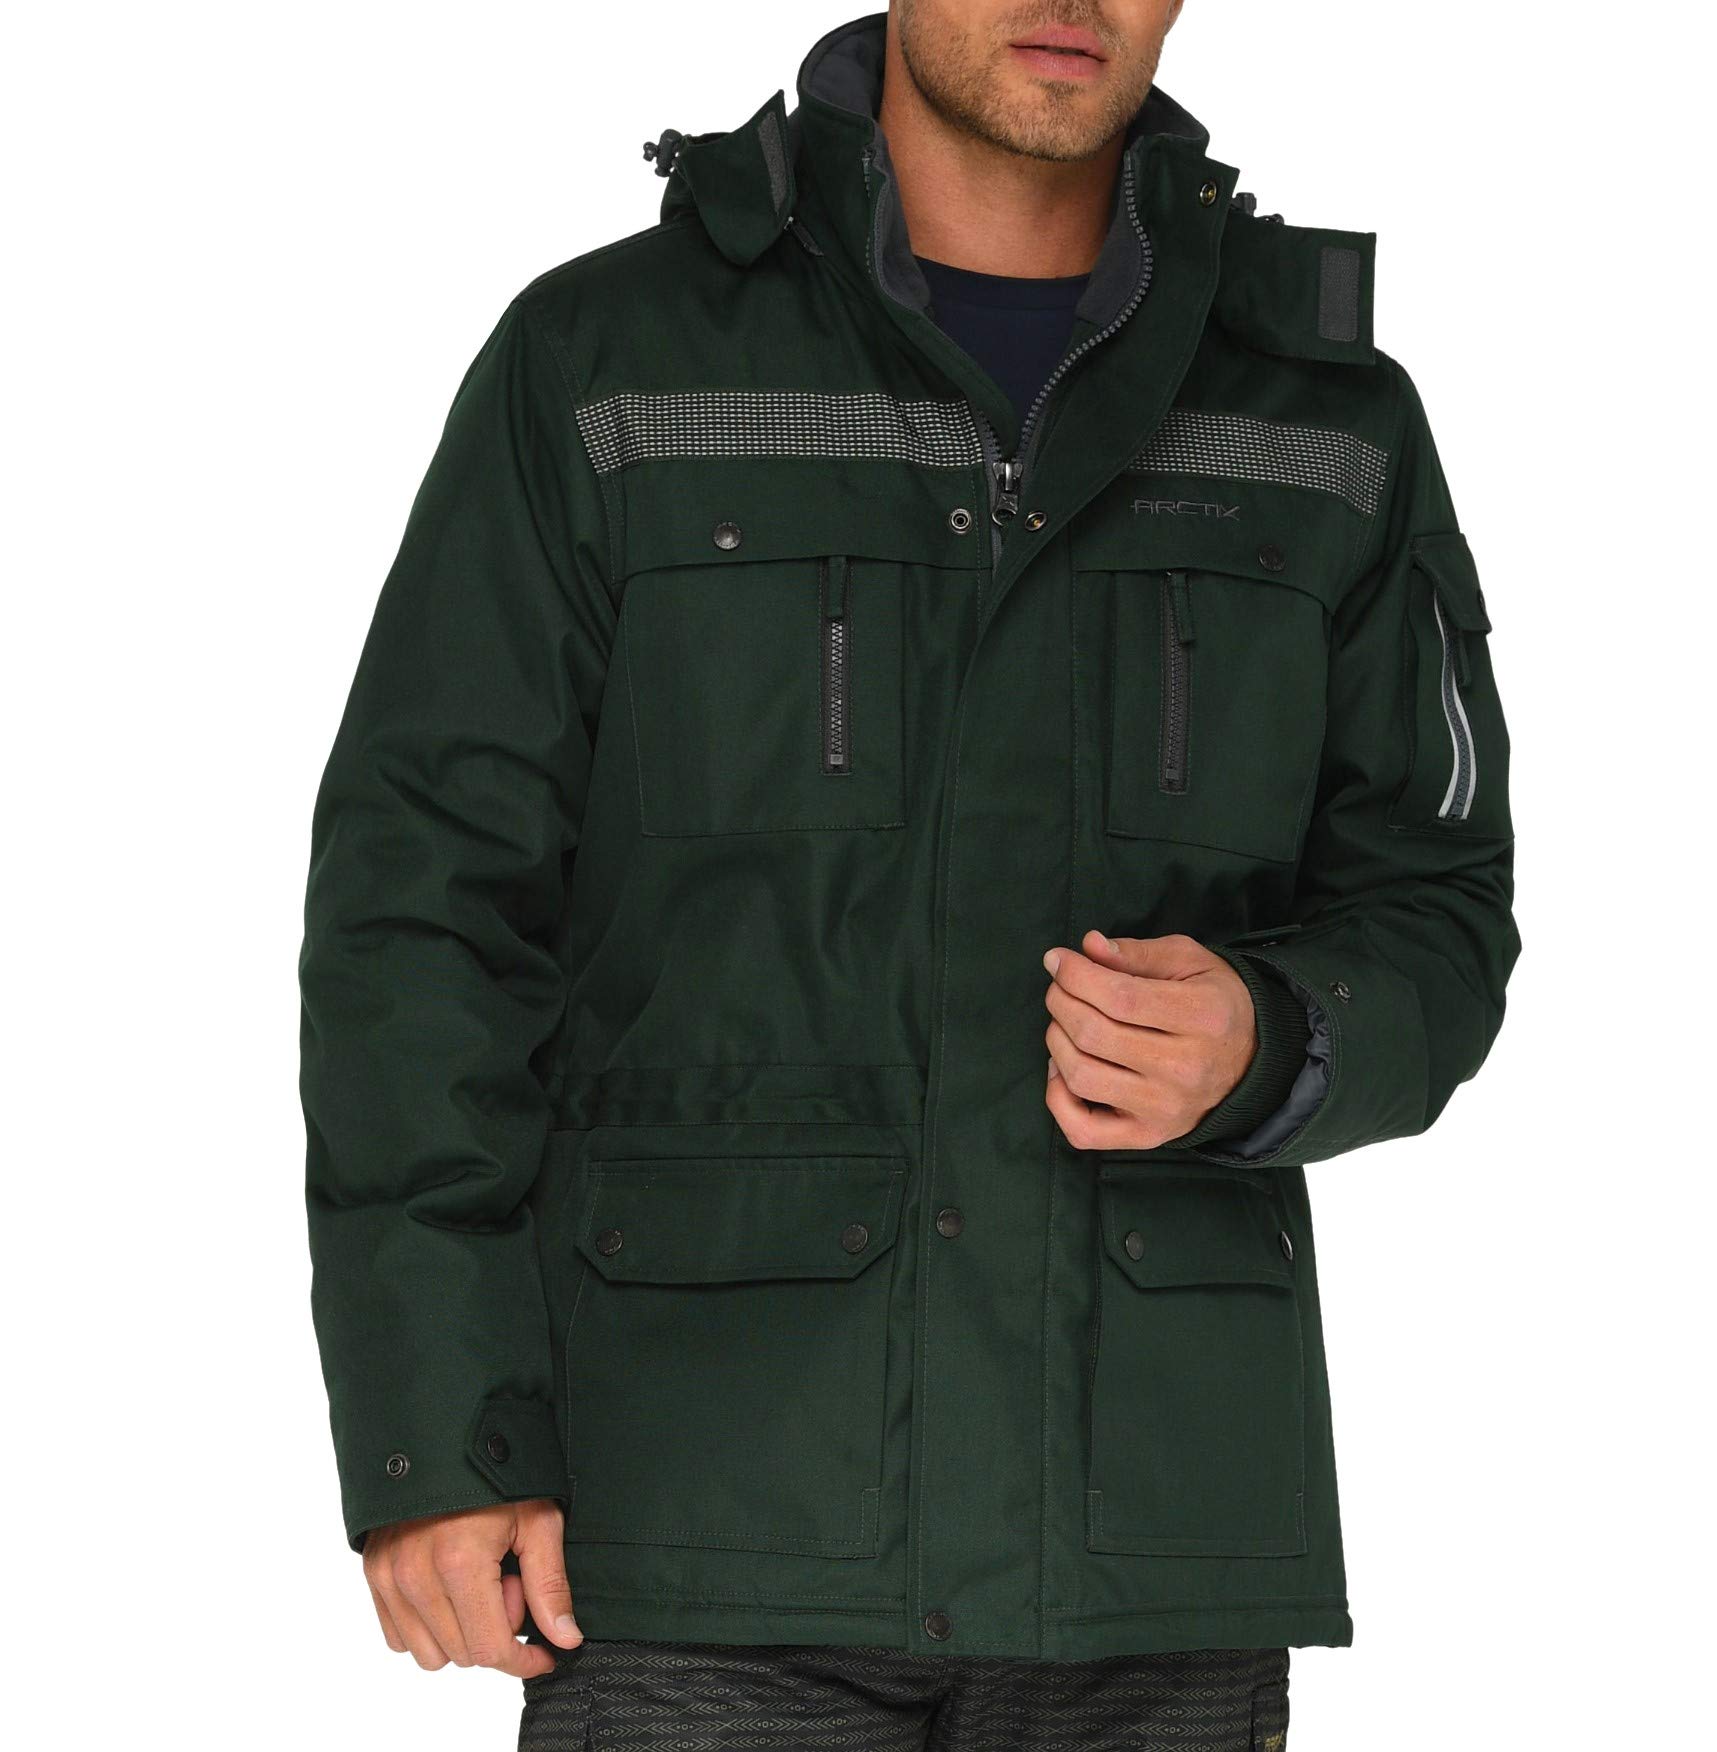 Arctix Men's Performance Tundra Jacket With Added Visibility